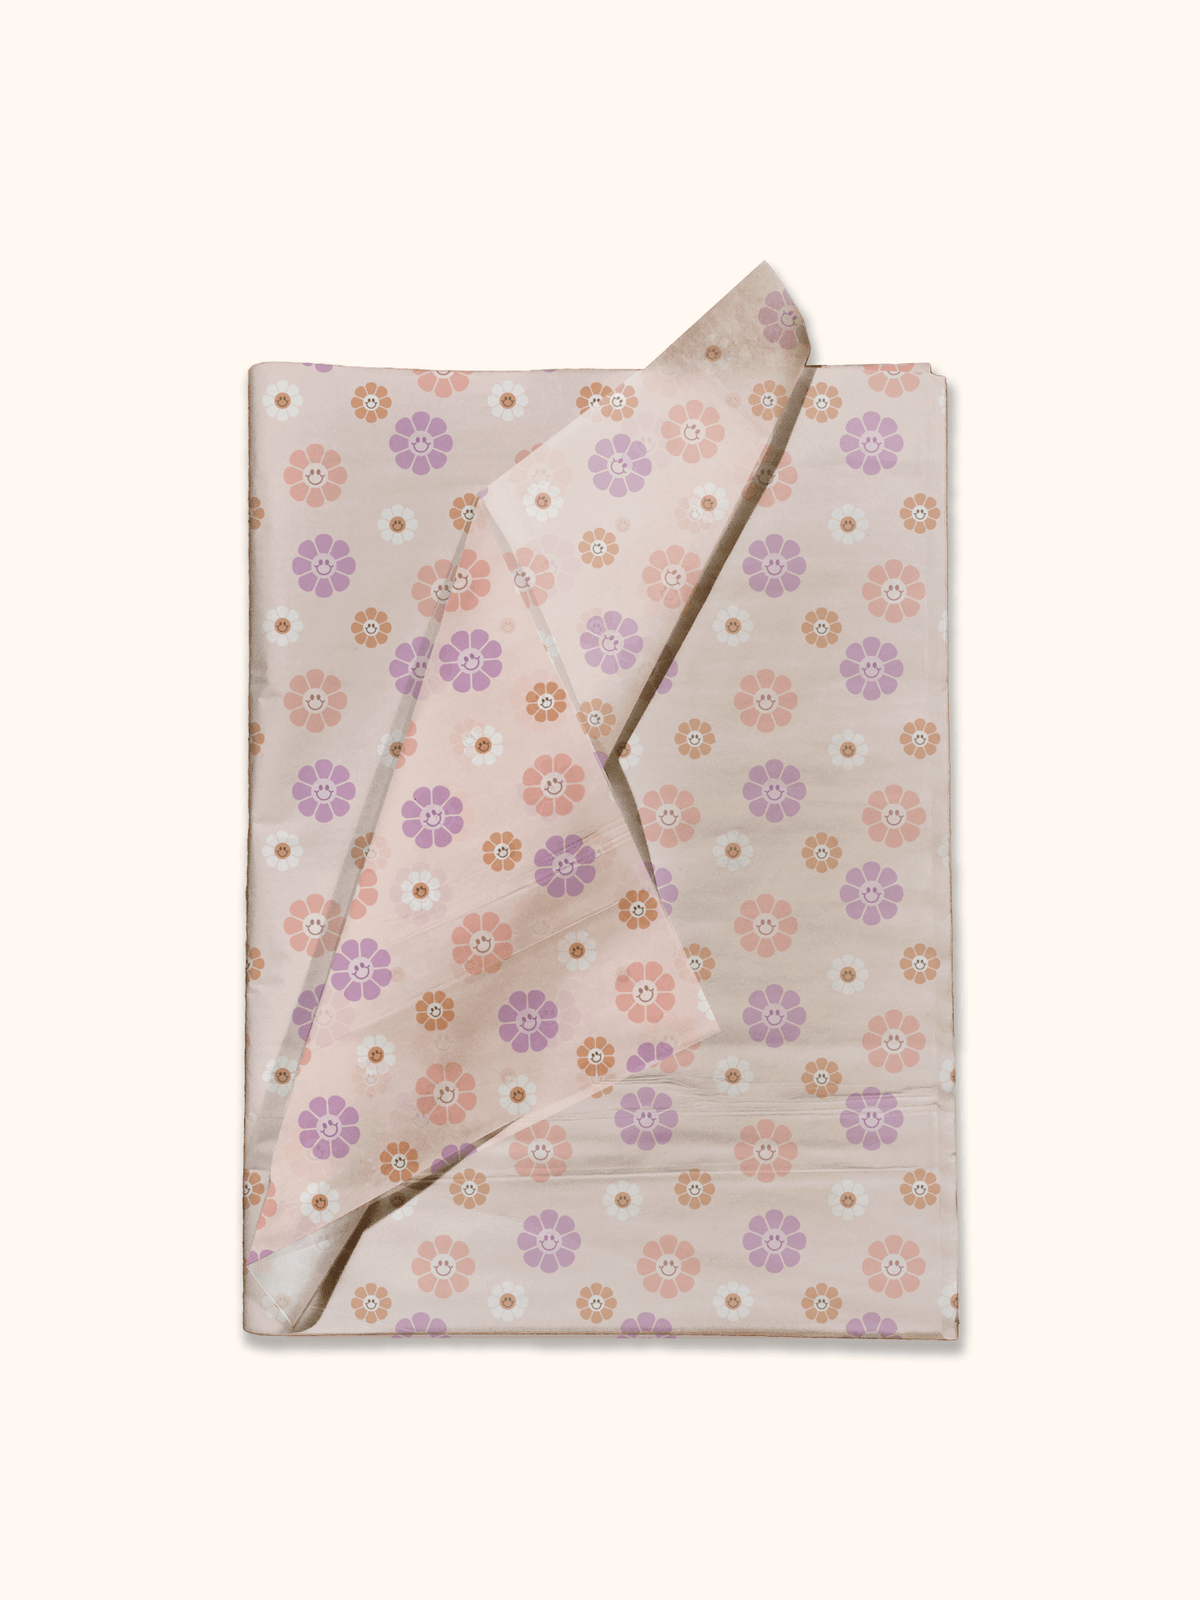 Tissue Paper with Designs - Floral Tissue Paper for Gift Wrapping 24 Decorative Sheets 20 x 30